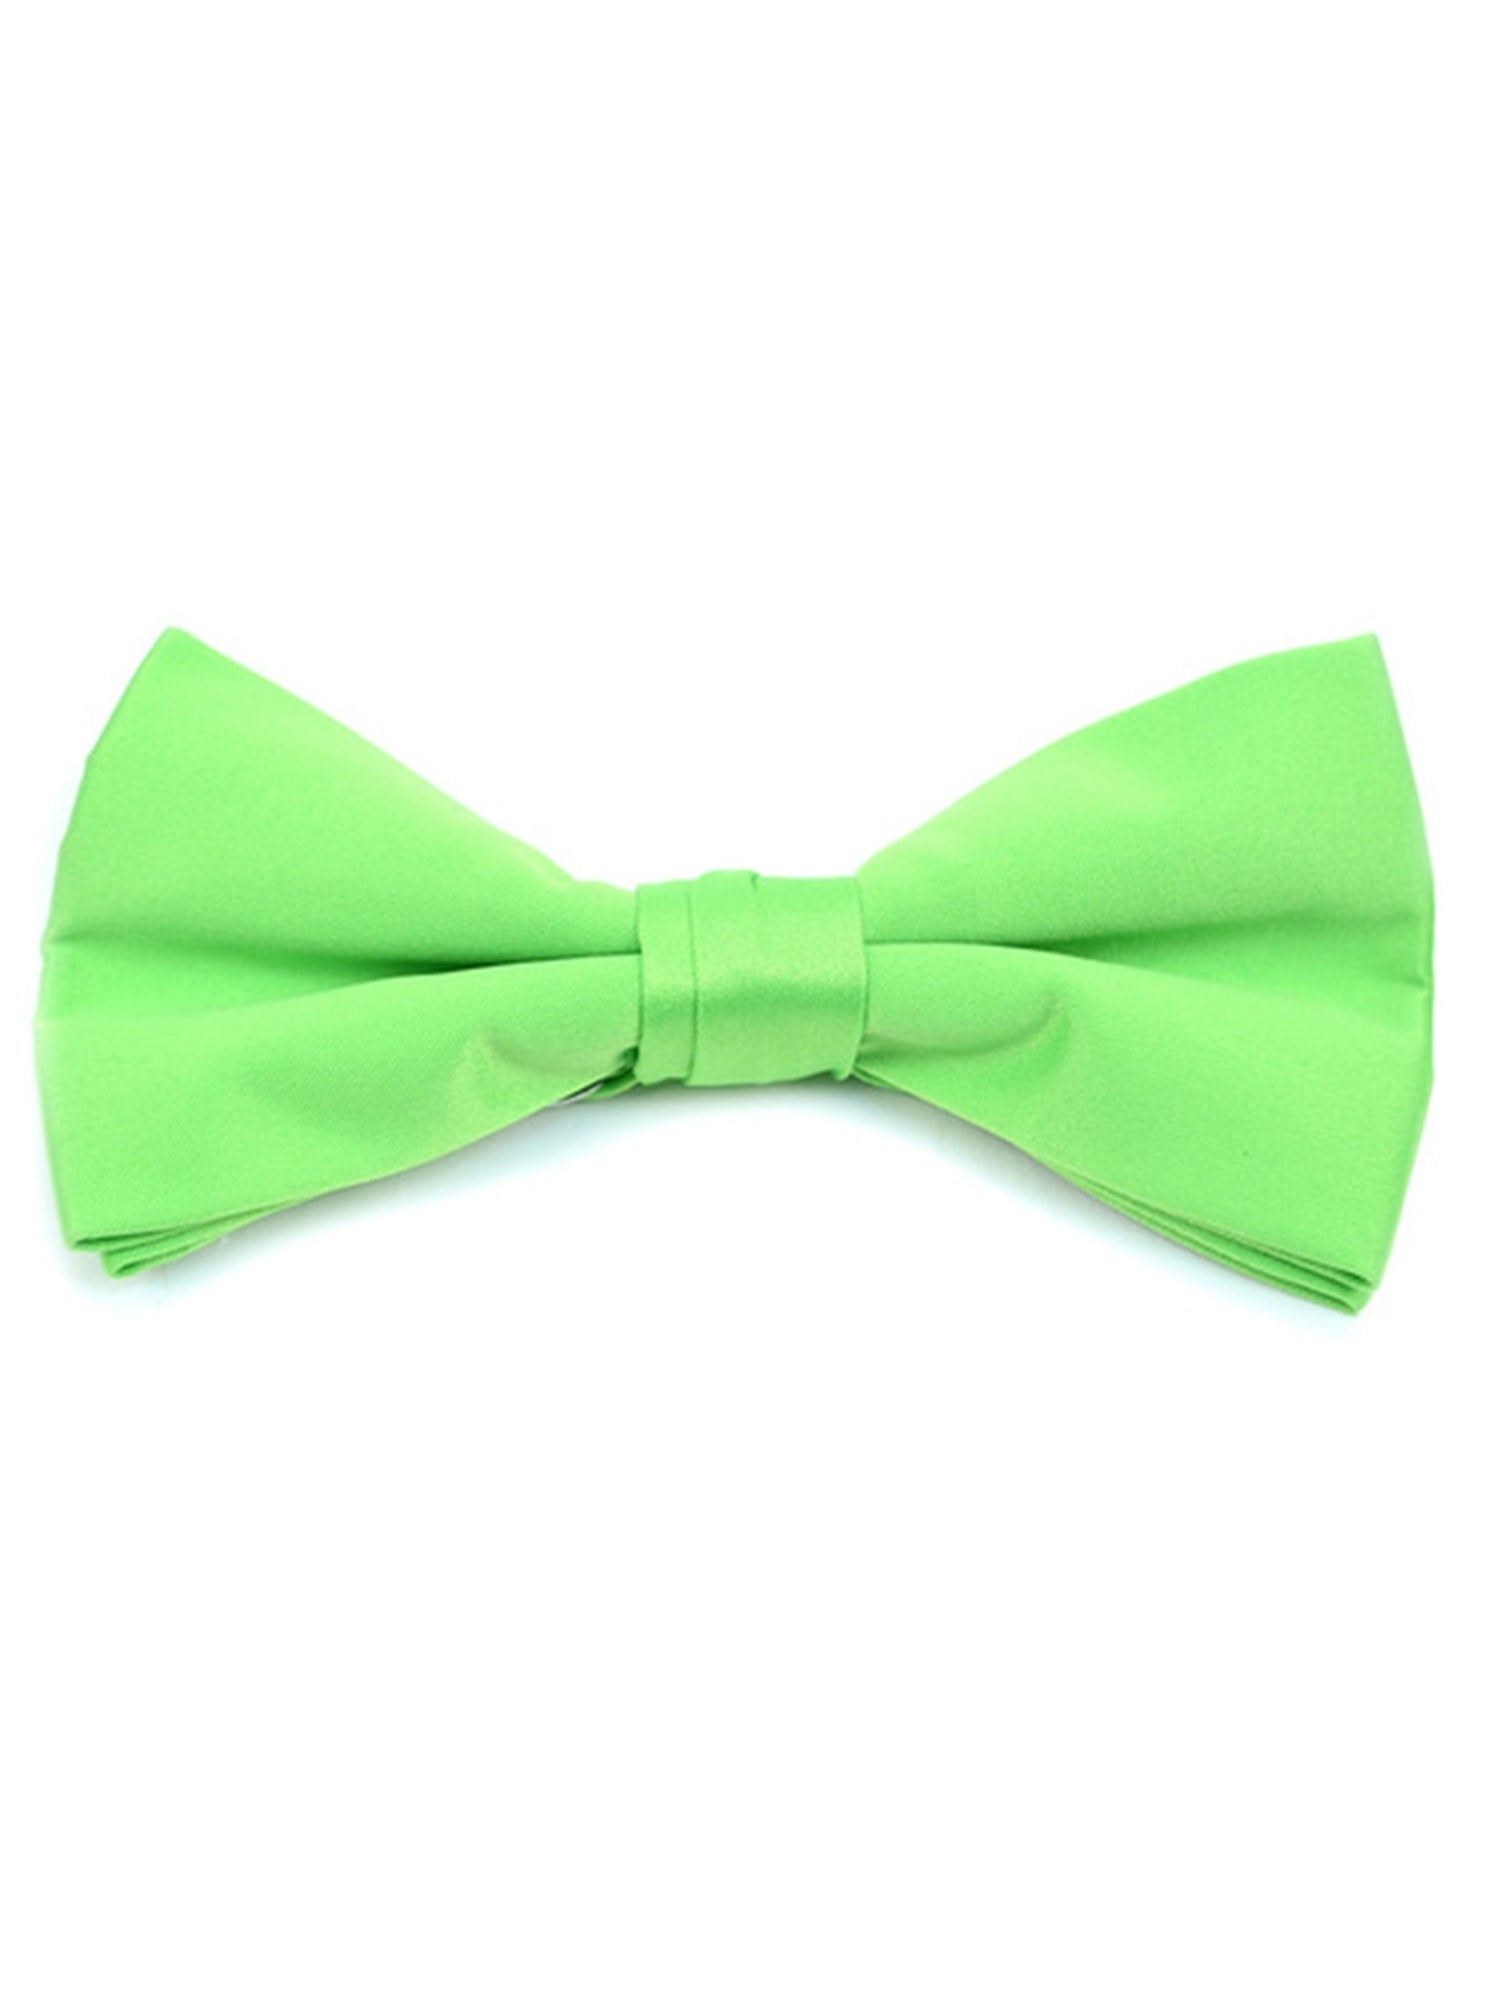 Young Boy's Pre-tied Clip On Bow Tie - Formal Tuxedo Solid Color Boy's Solid Color Bow Tie TheDapperTie Neon Green One Size 